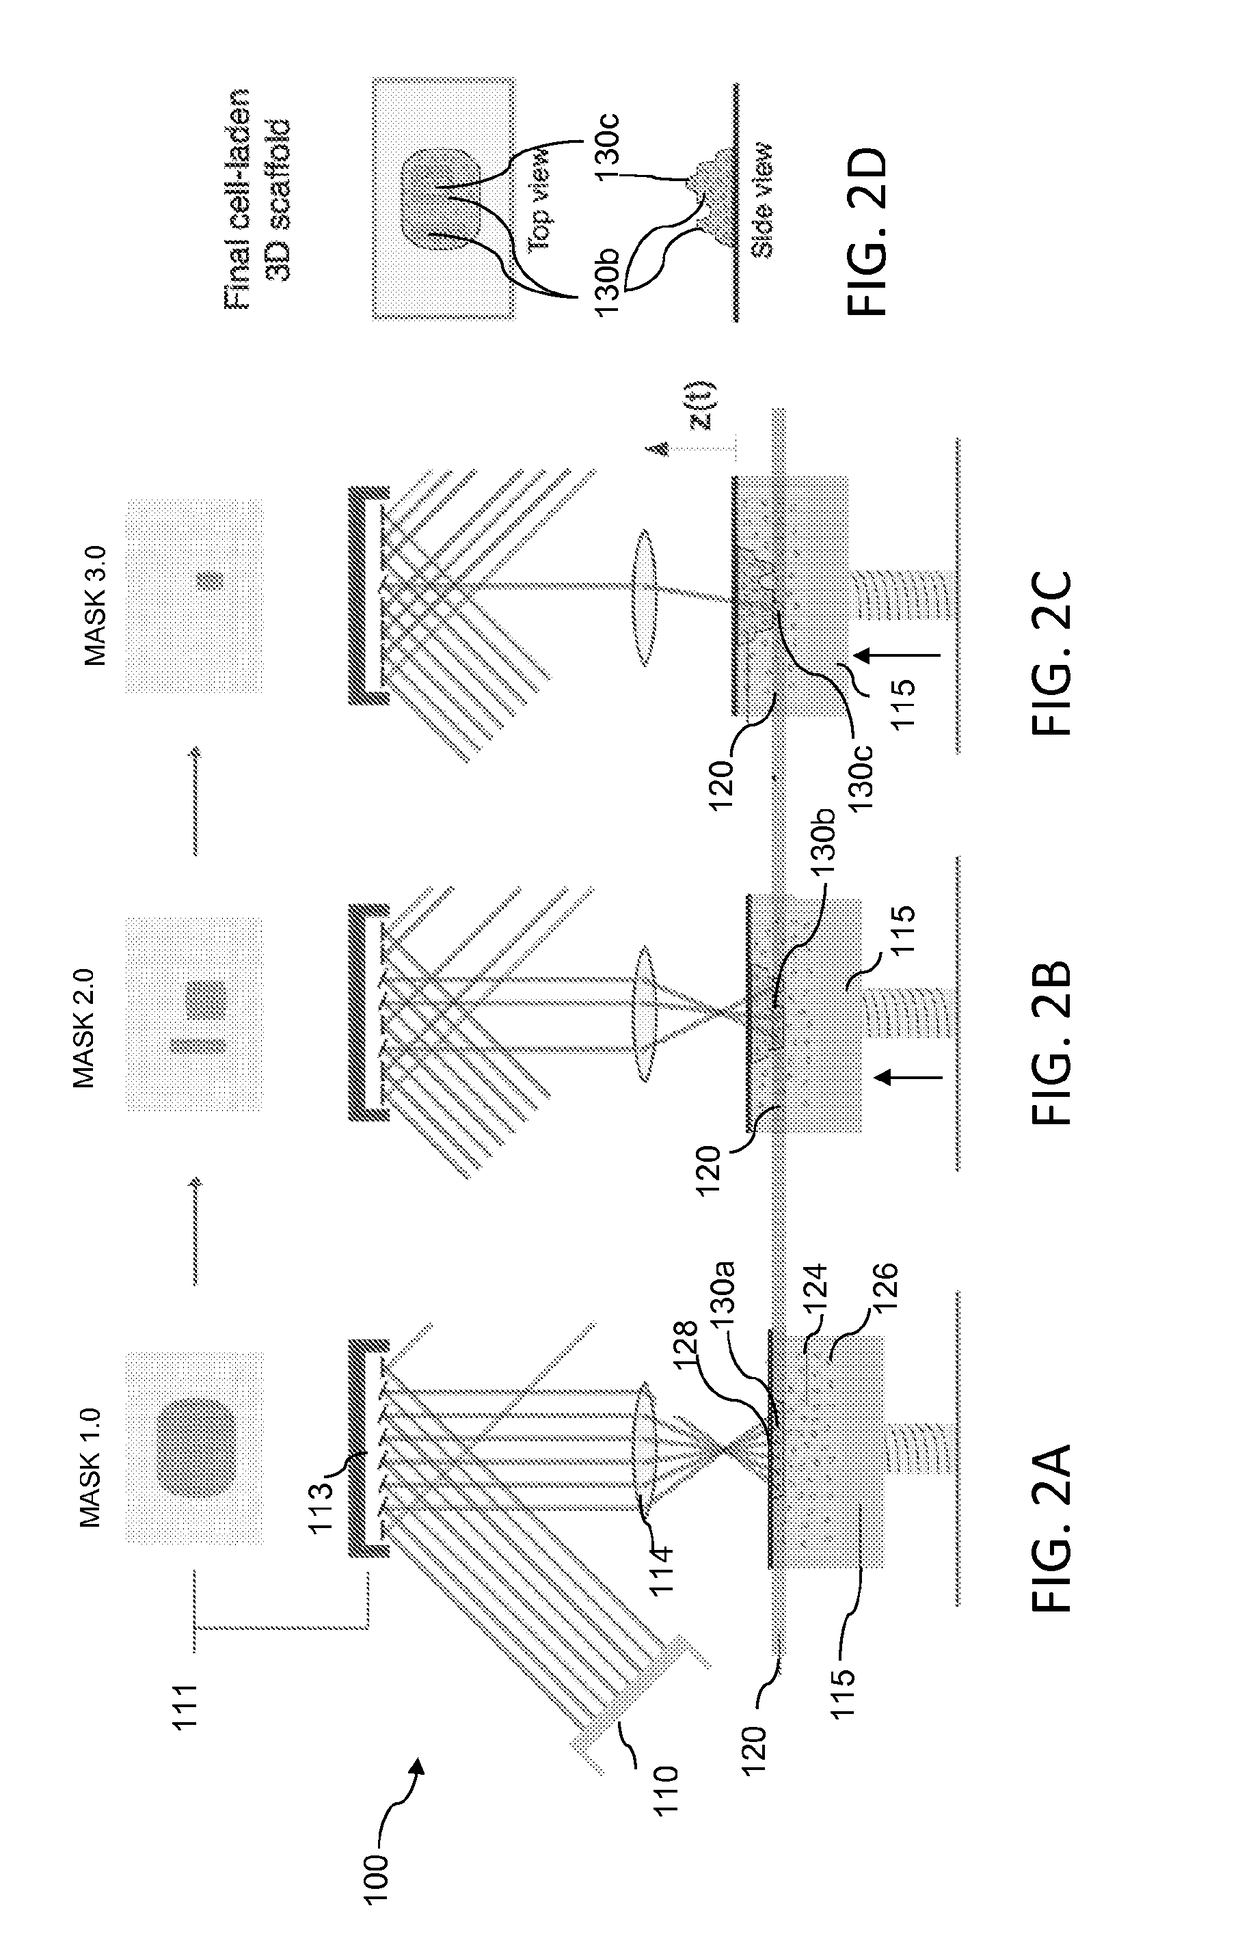 Layerless bioprinting via dynamic optical projection and uses thereof